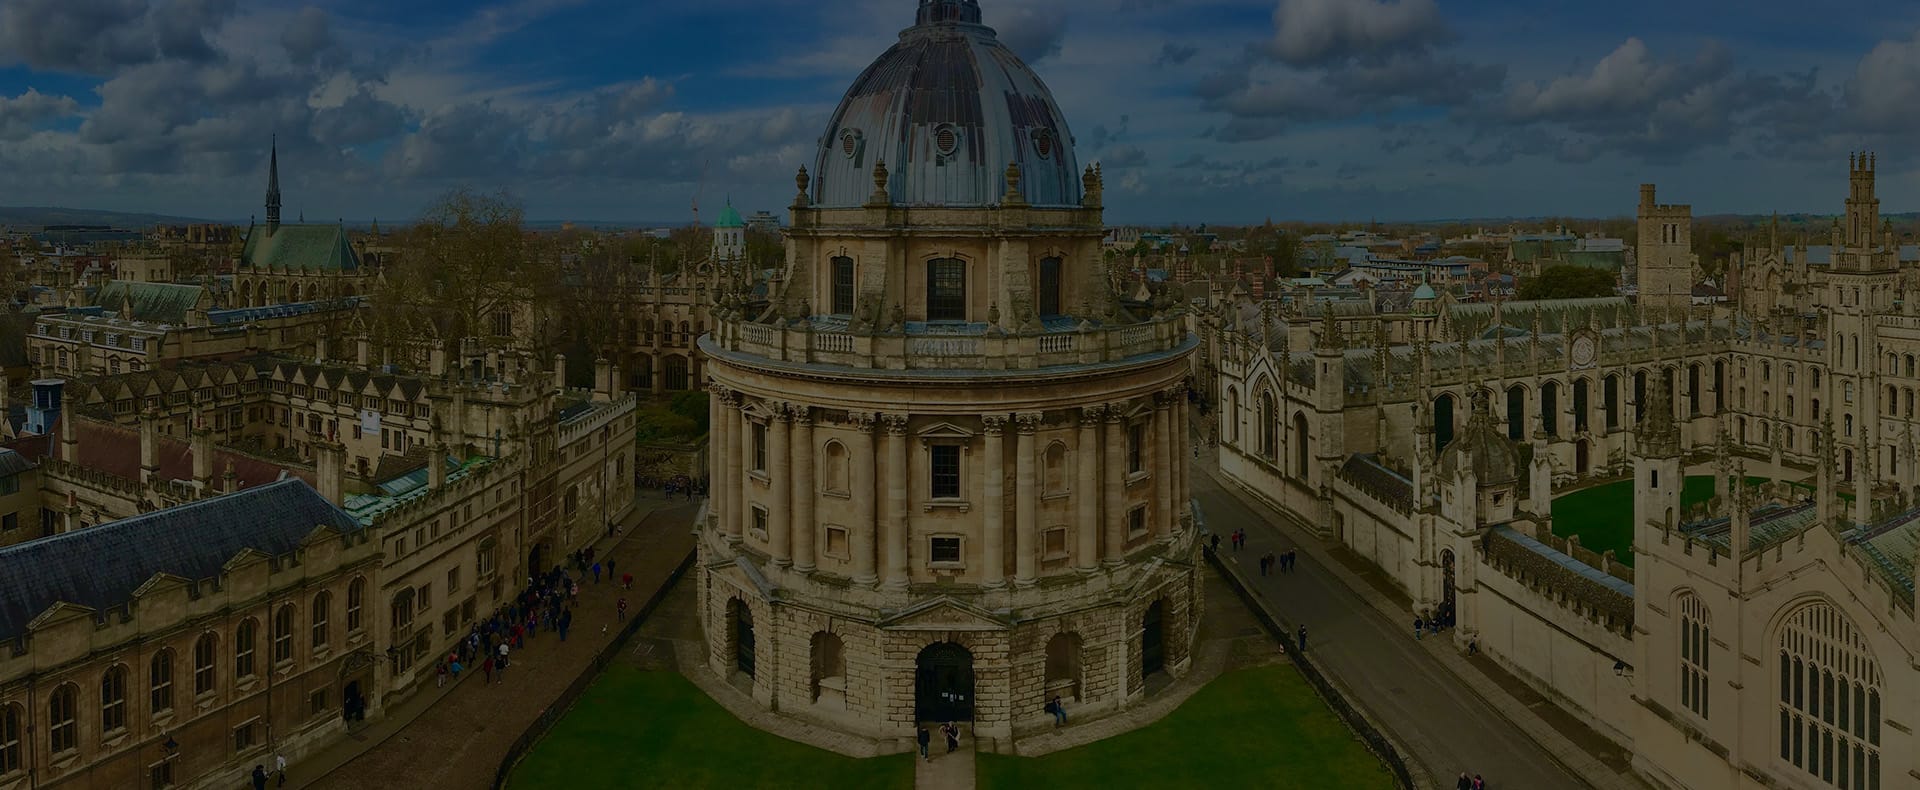 Radcliffe Camera at Oxford University, a tall domed building surrounded by smaller limestone buildings and grass.